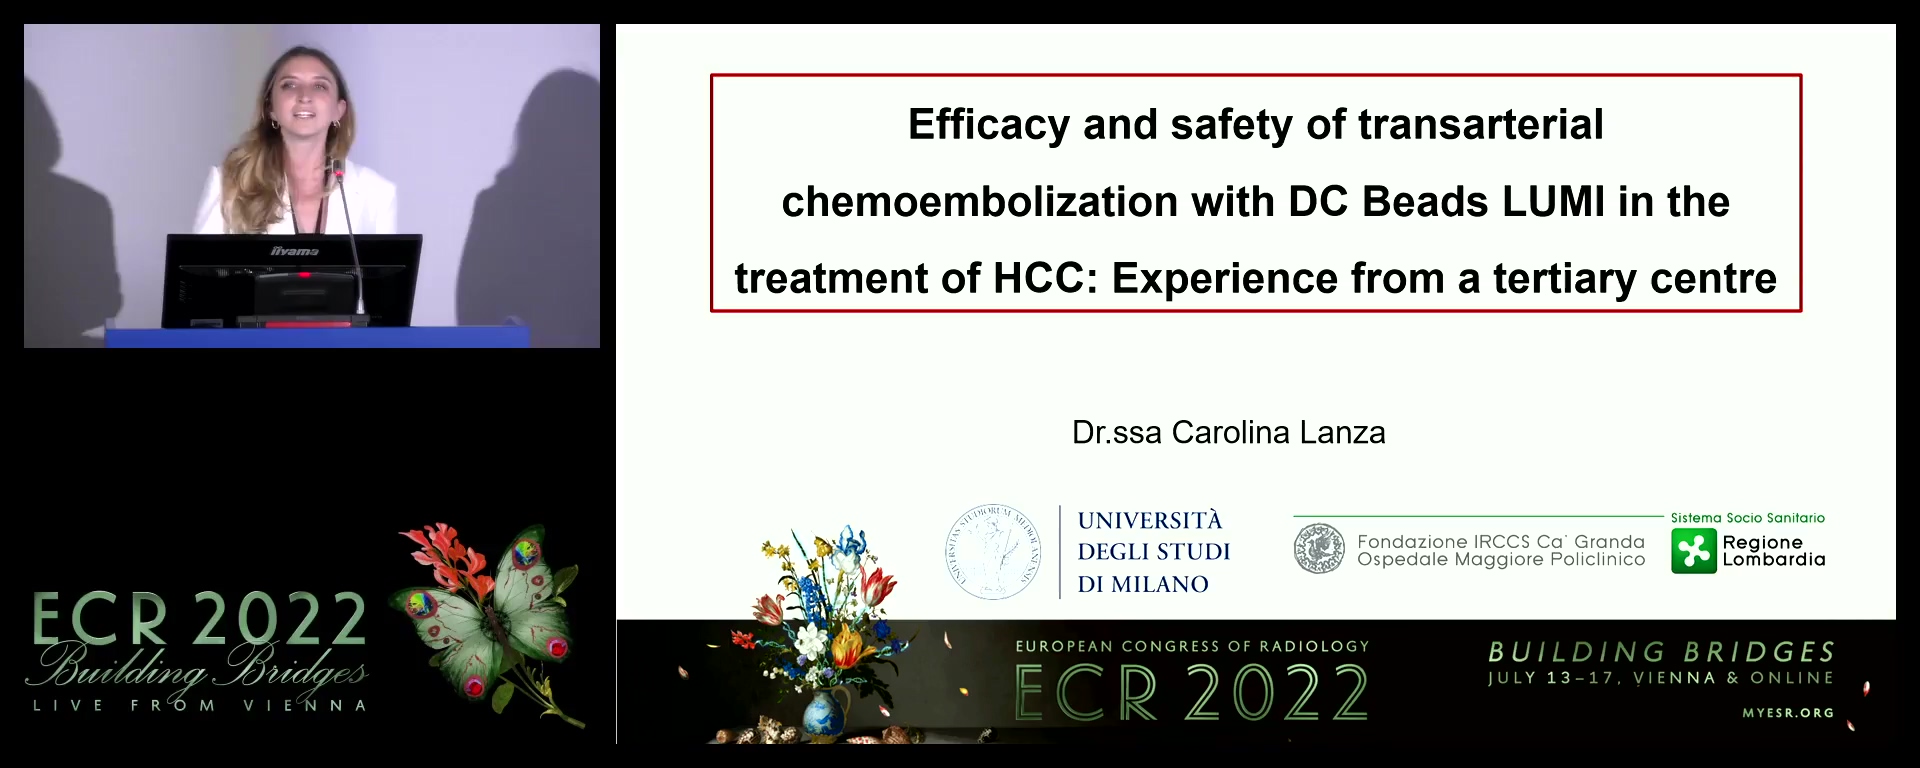 Efficacy and safety of transarterial chemoembolisation with DC Beads LUMI in the treatment of HCC: experience from a tertiary centre - Carolina Lanza, Milano / IT